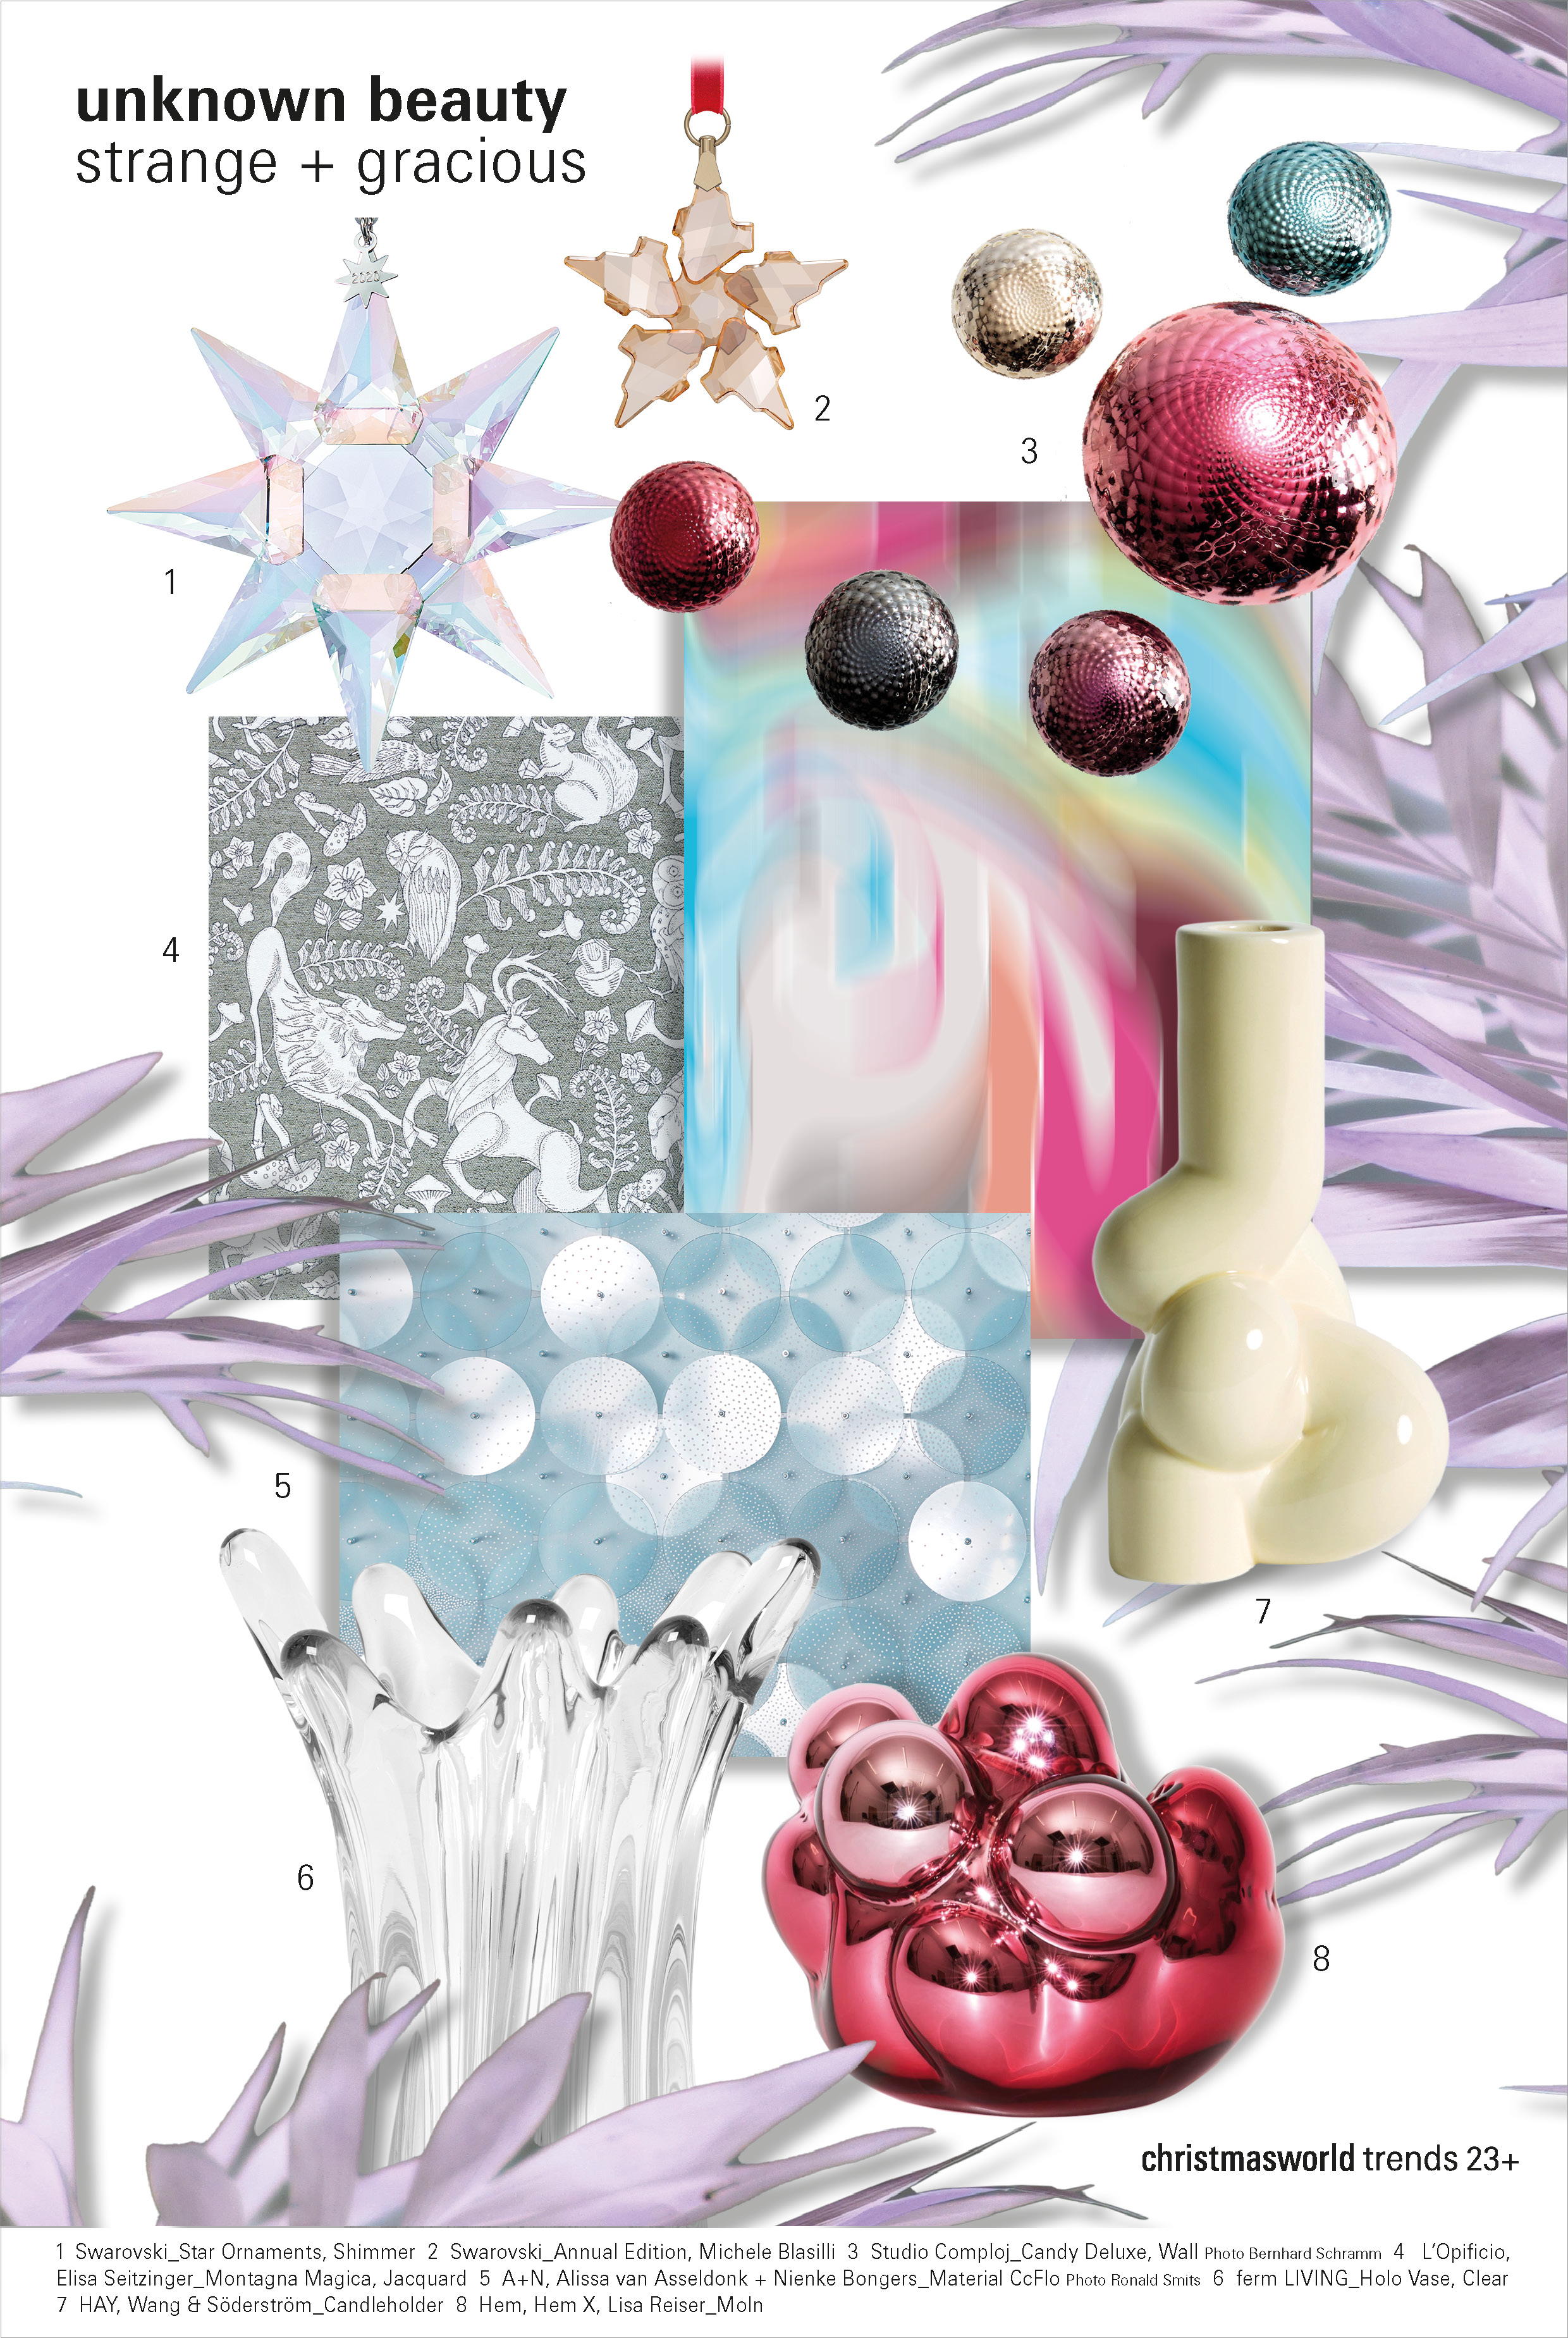 Christmasworld Trends 23+: unknown beauty_strange + gracious